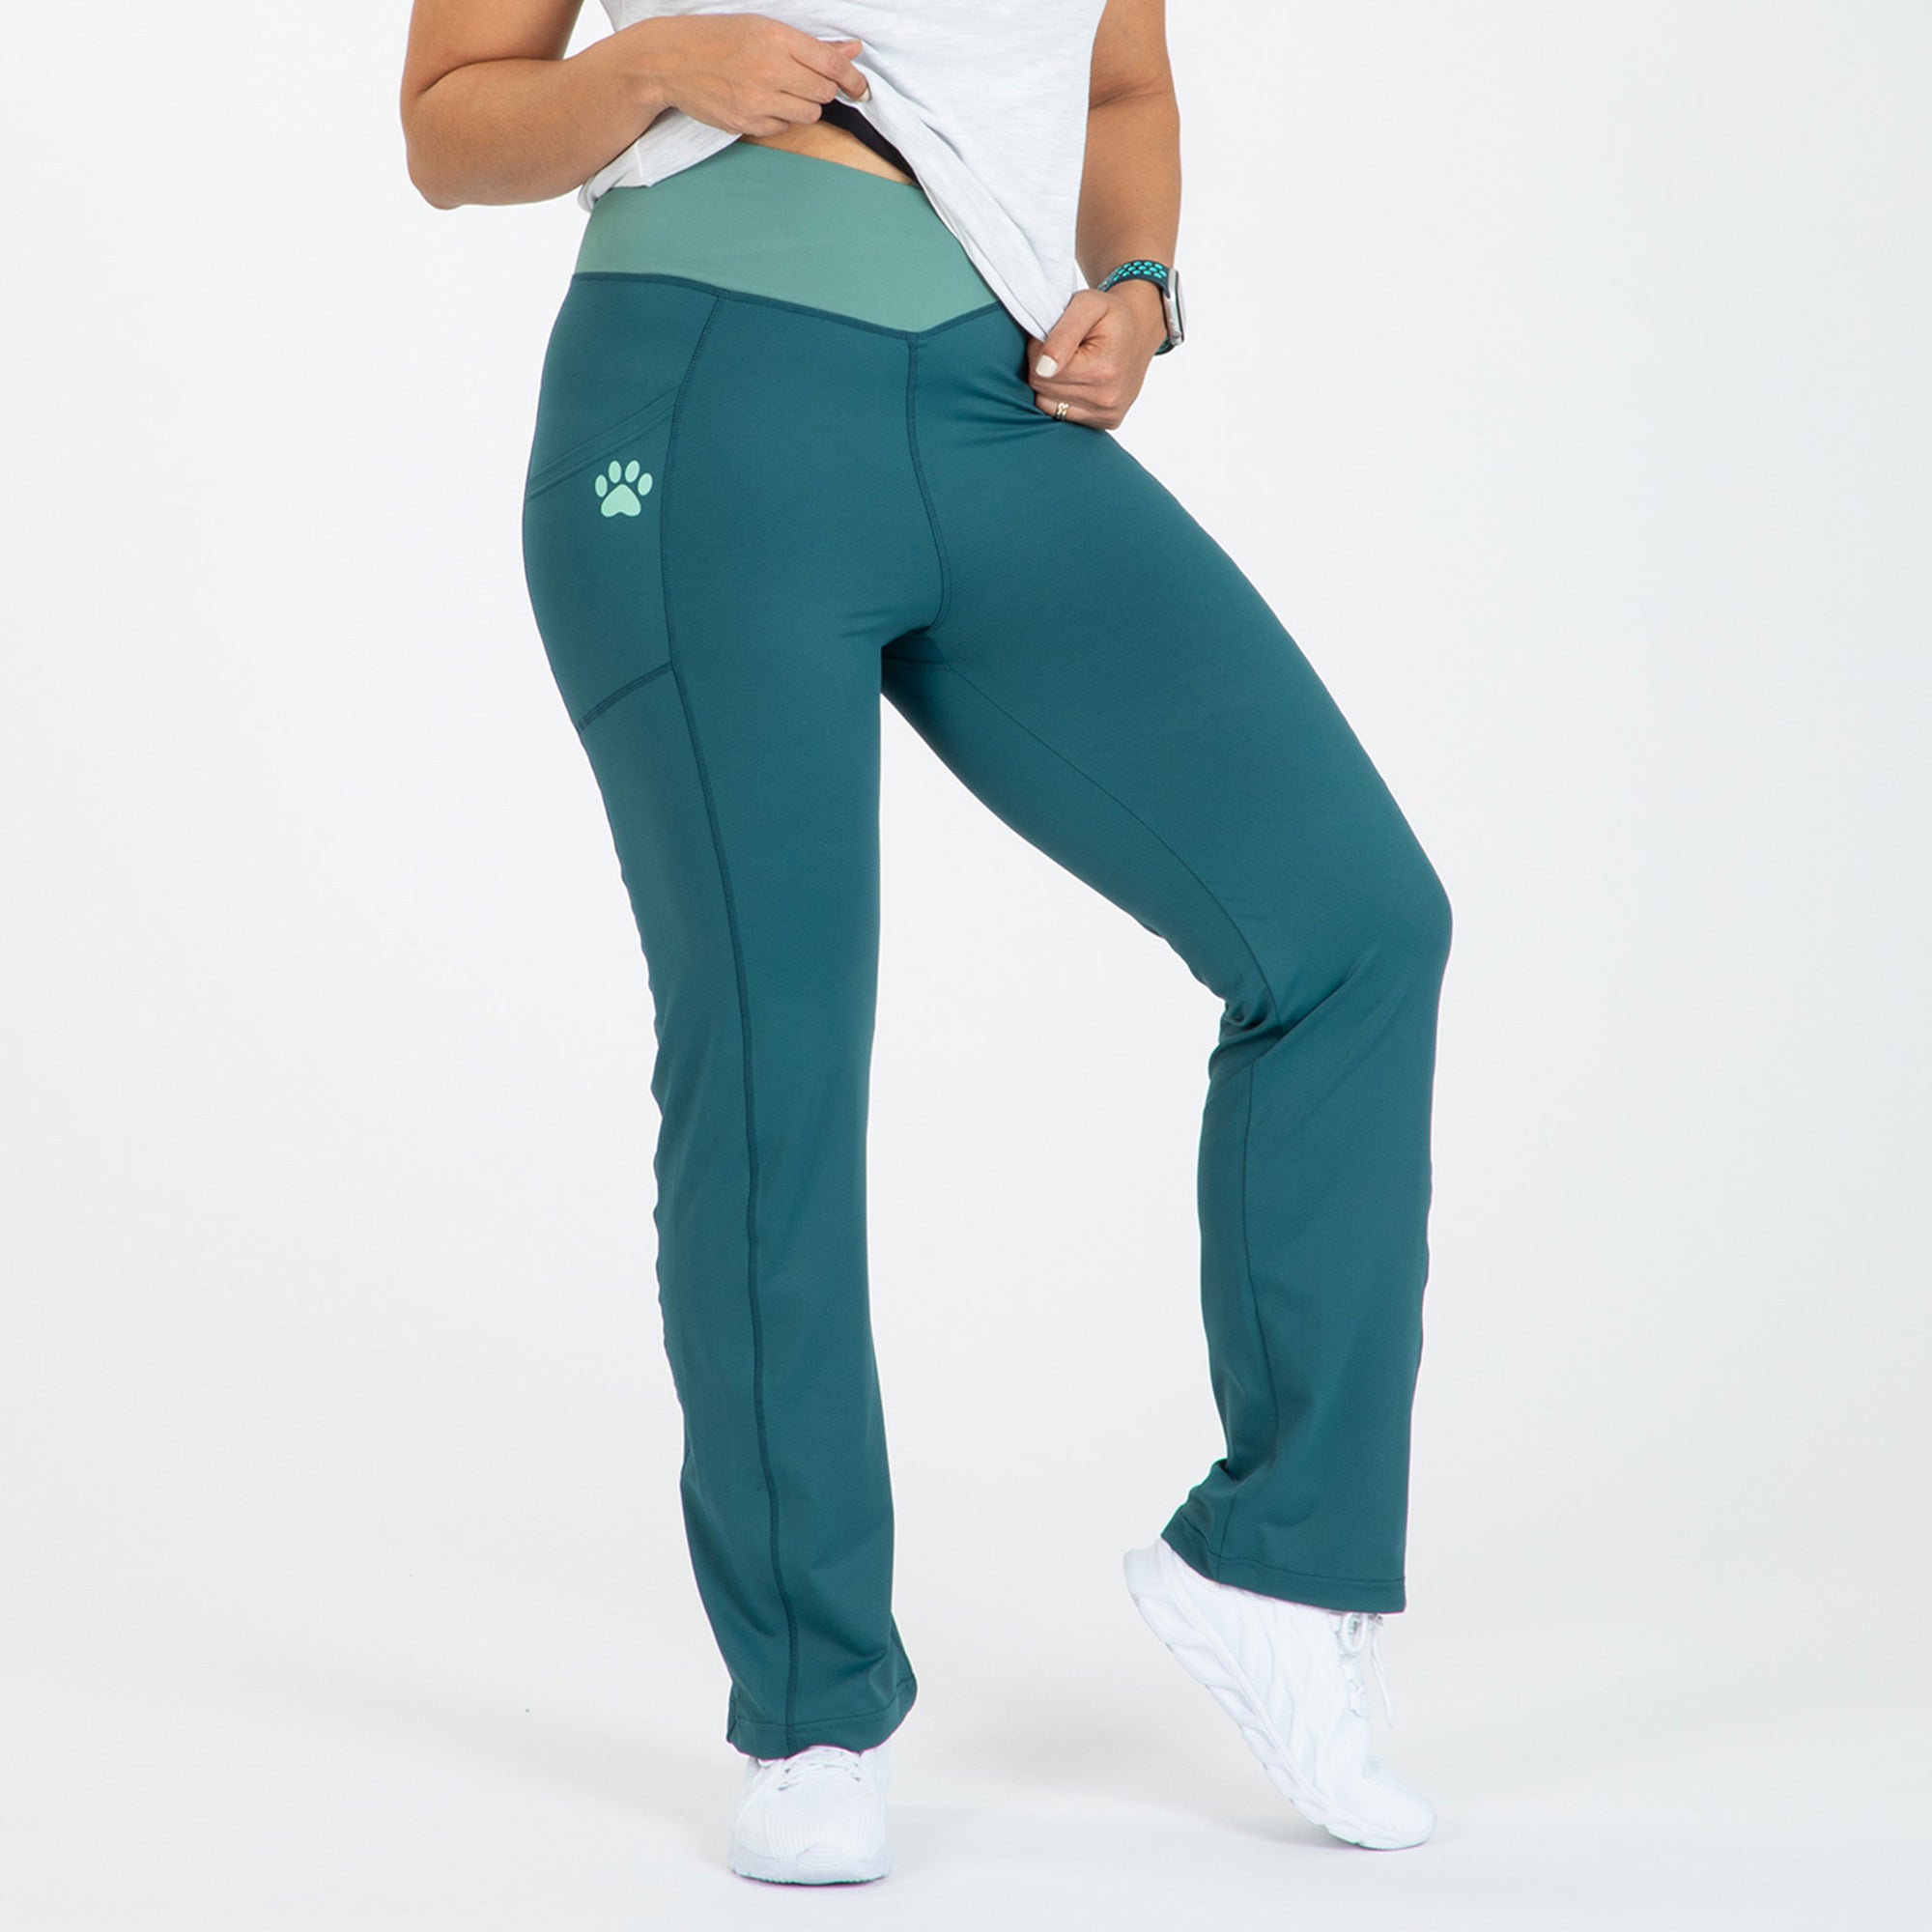 Yoga Paw Print Cross Over Separates - Teal - Pants - S